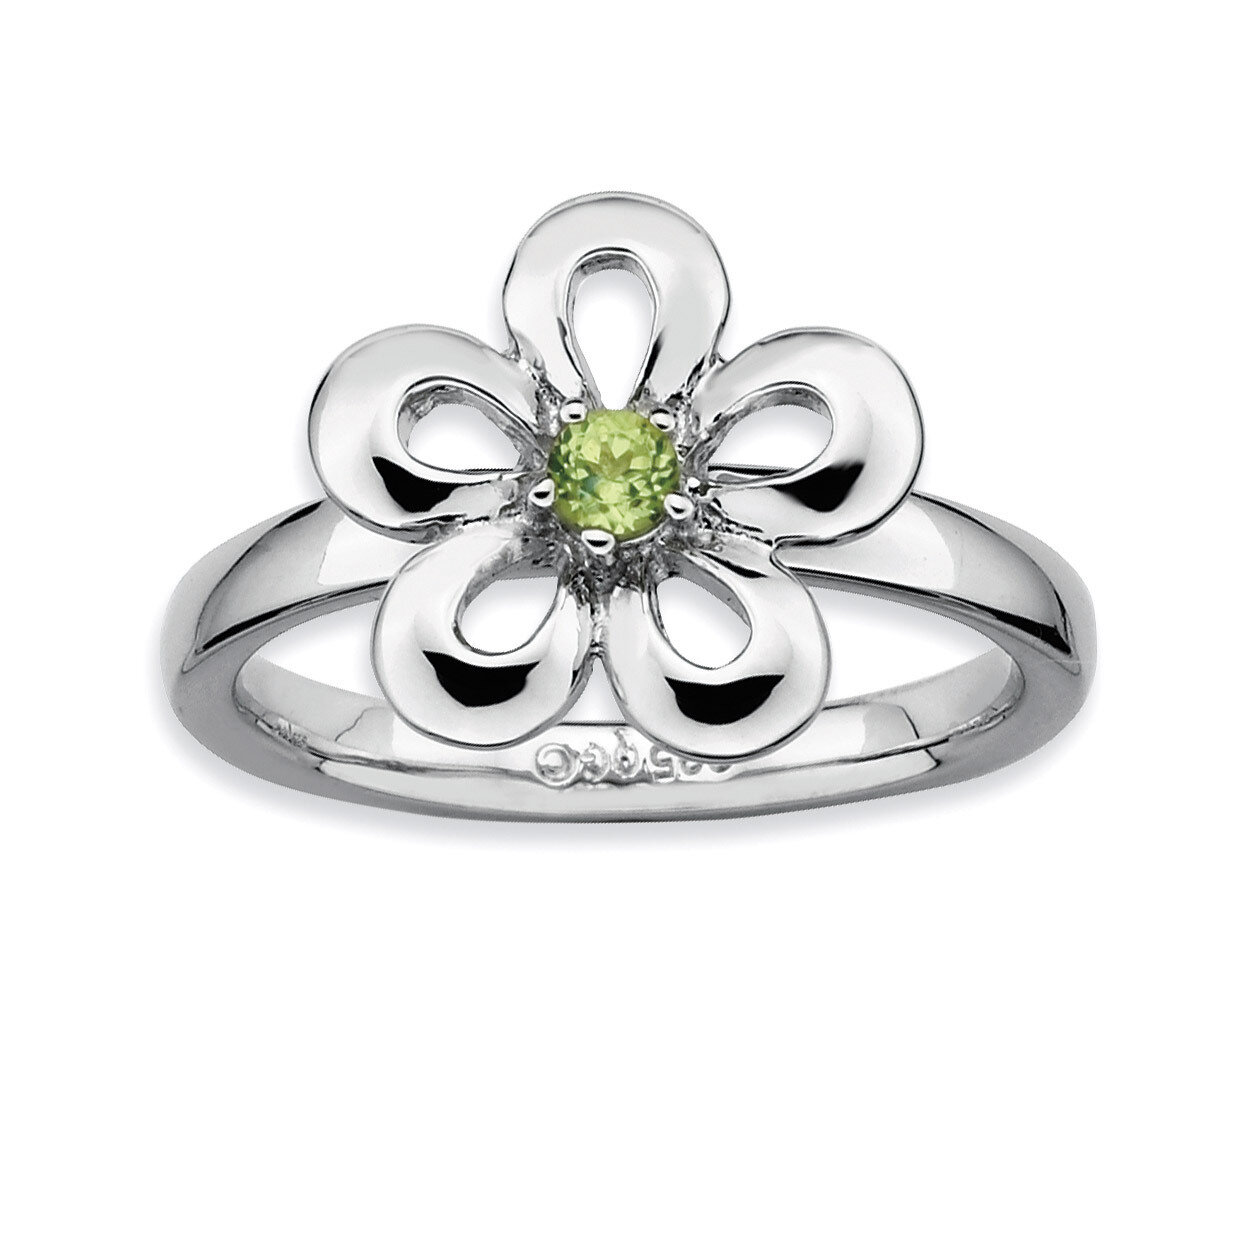 Peridot Flower Ring - Sterling Silver Polished QSK119